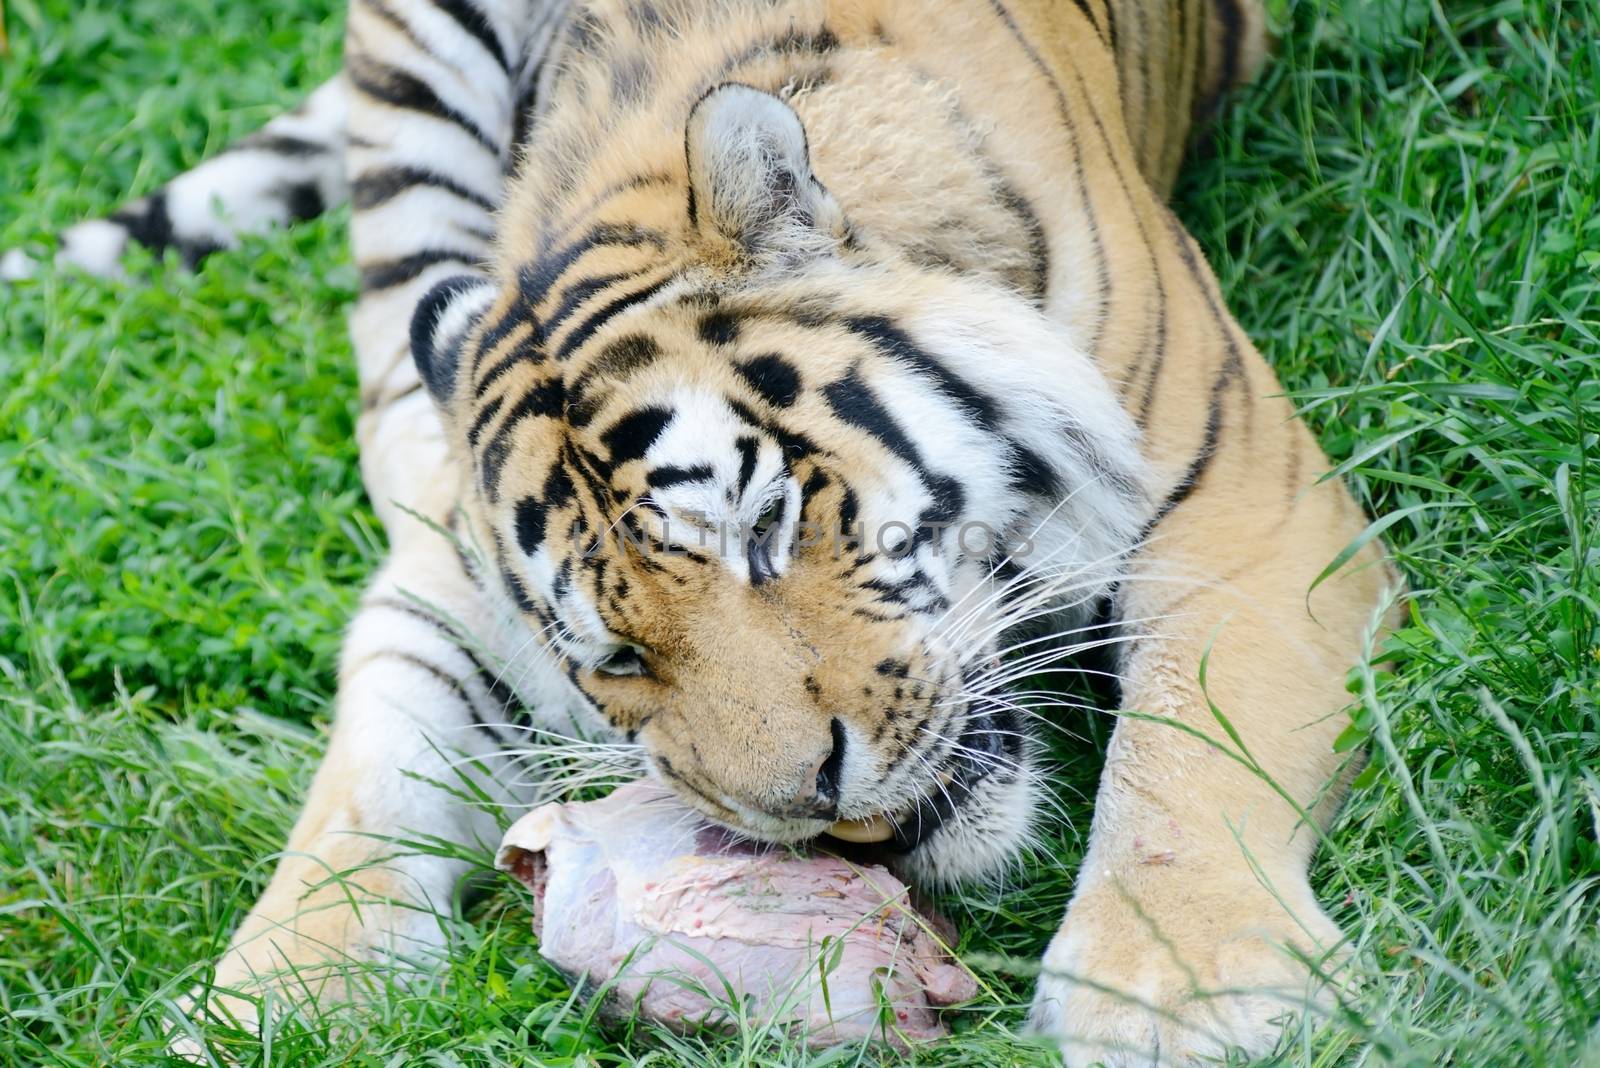 Tiger eating by kmwphotography